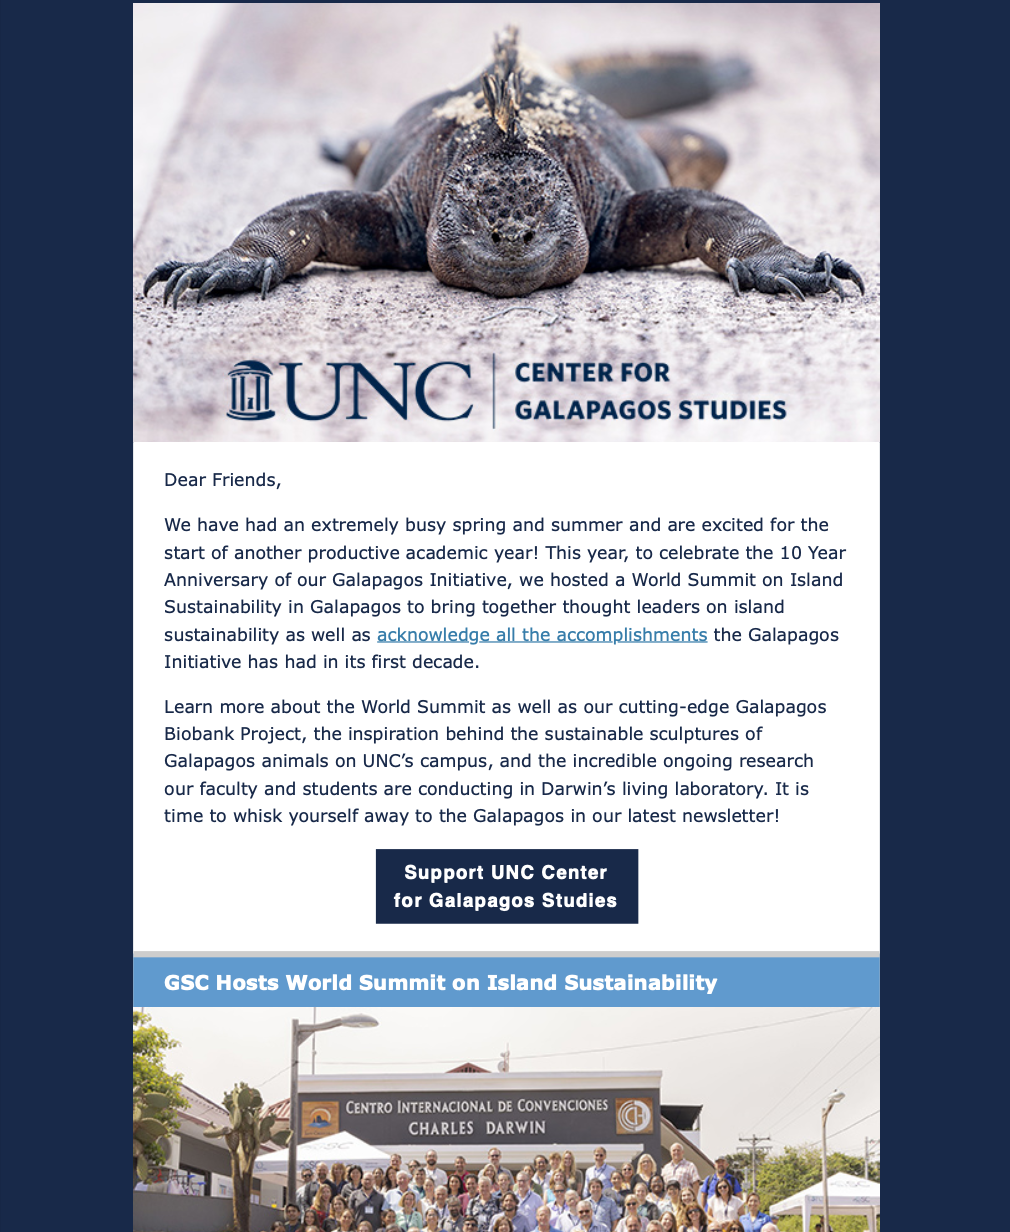 The first page of the September 2022 newsletter